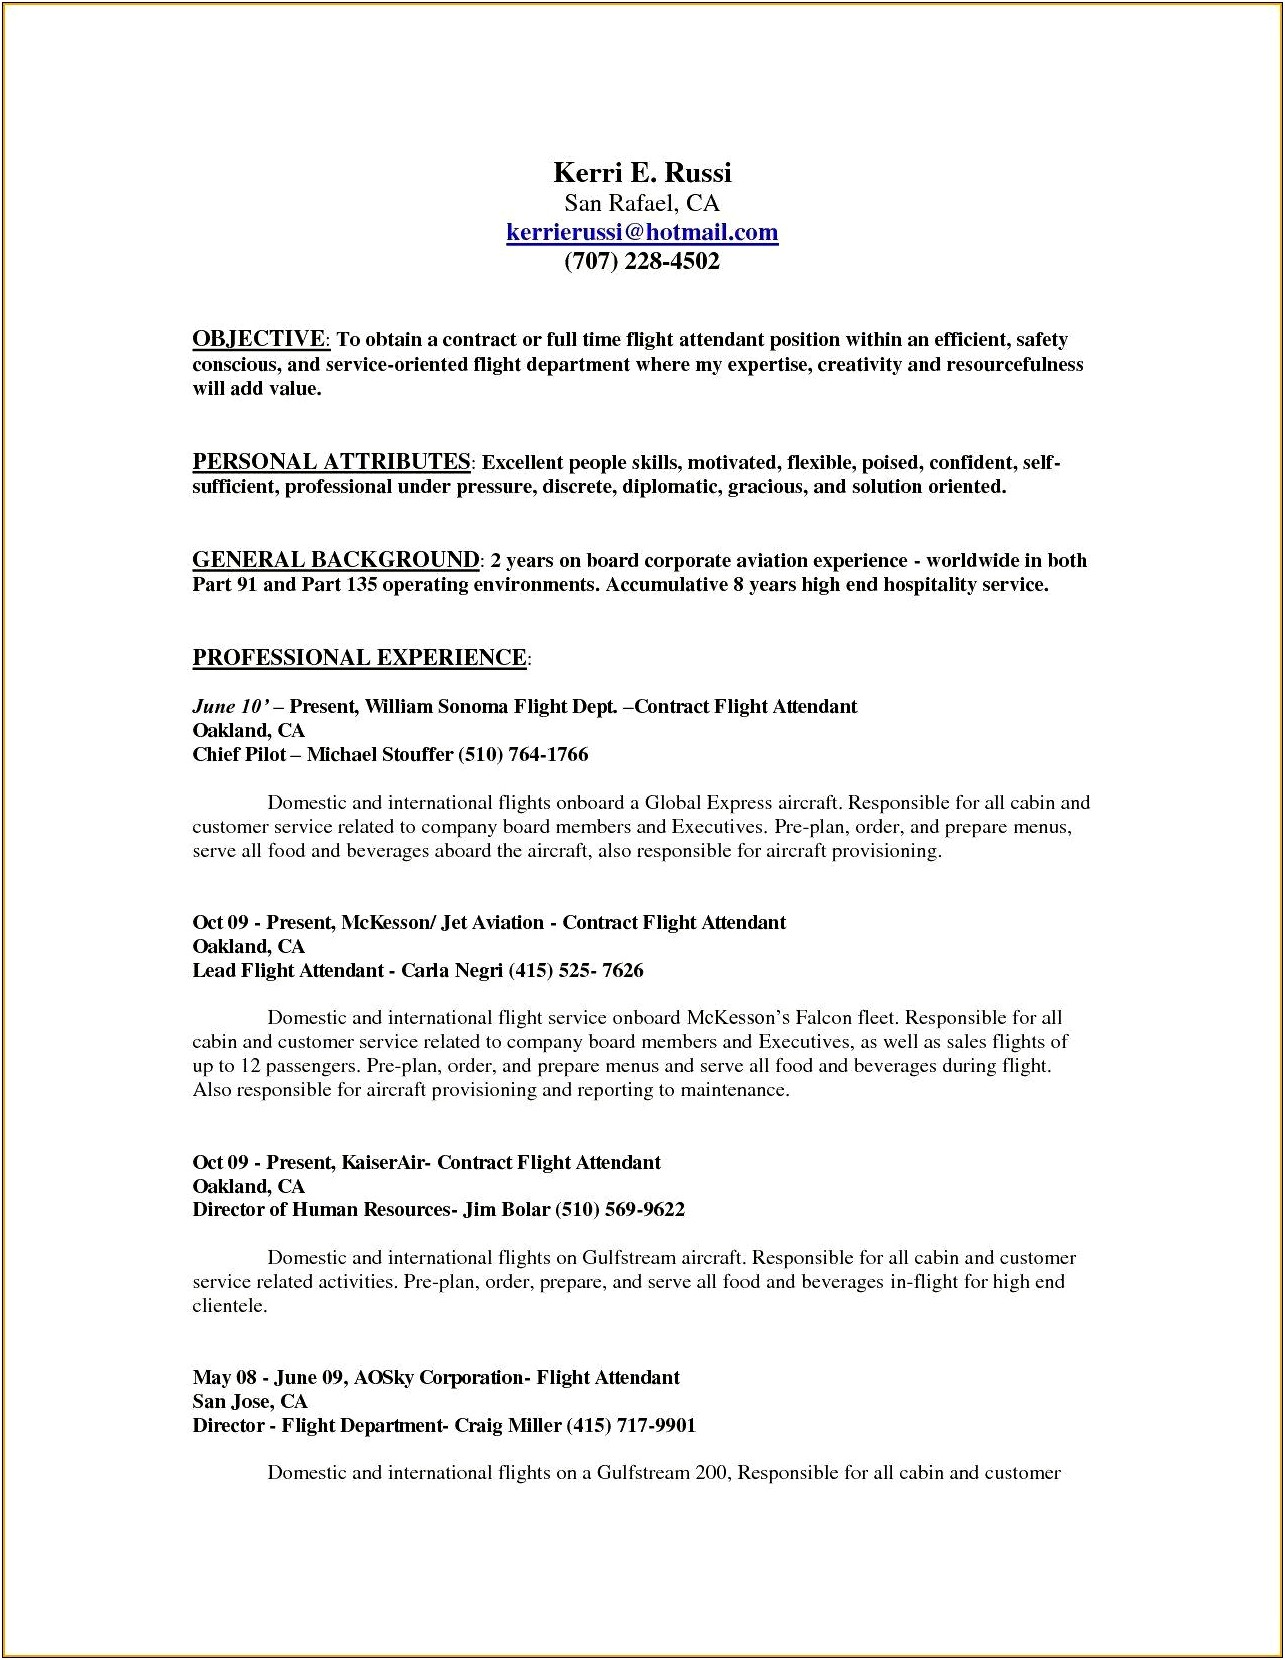 Resume For Flight Attendant With No Experience Objective